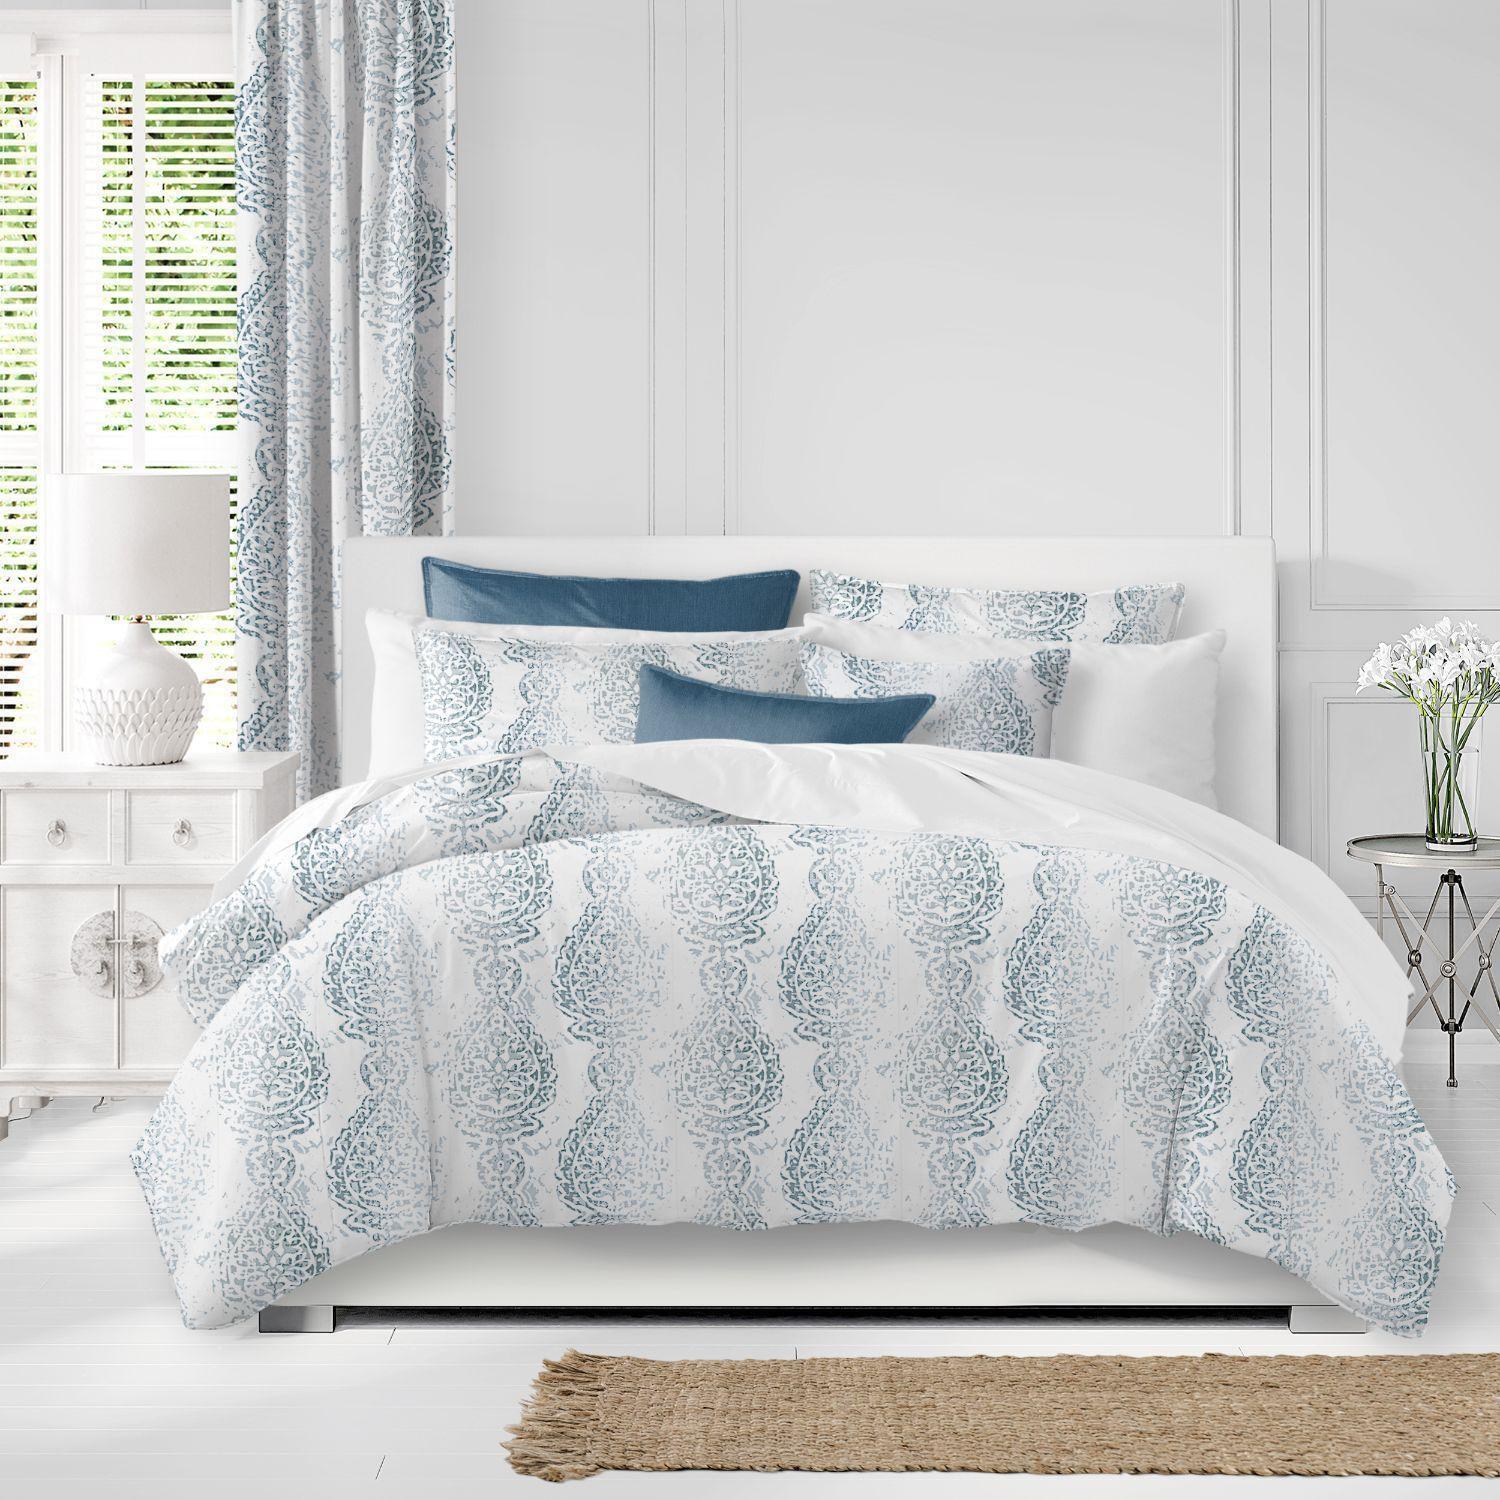 Set of 3 White and Blue Distressed Paisley Comforter with Pillow Shams - Queen